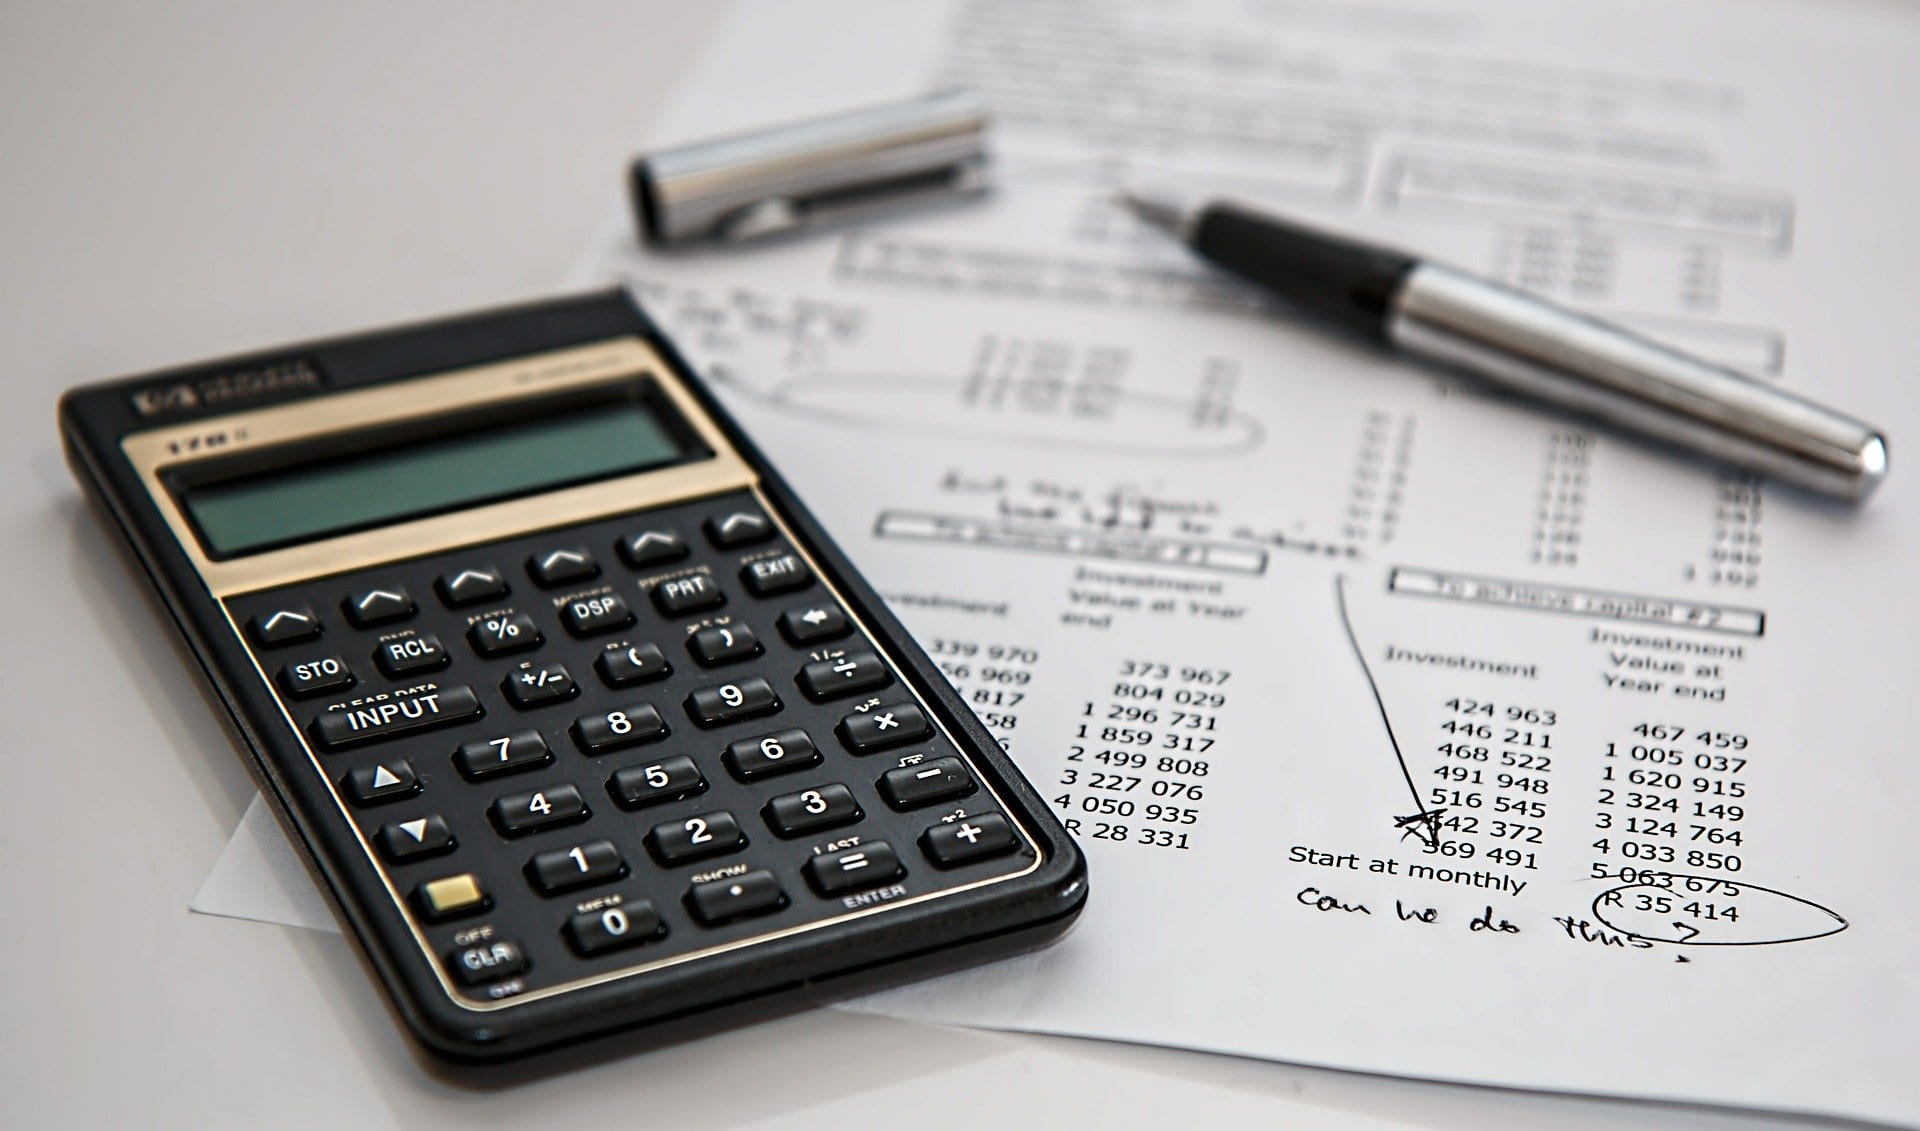 What are the advantages of accounting